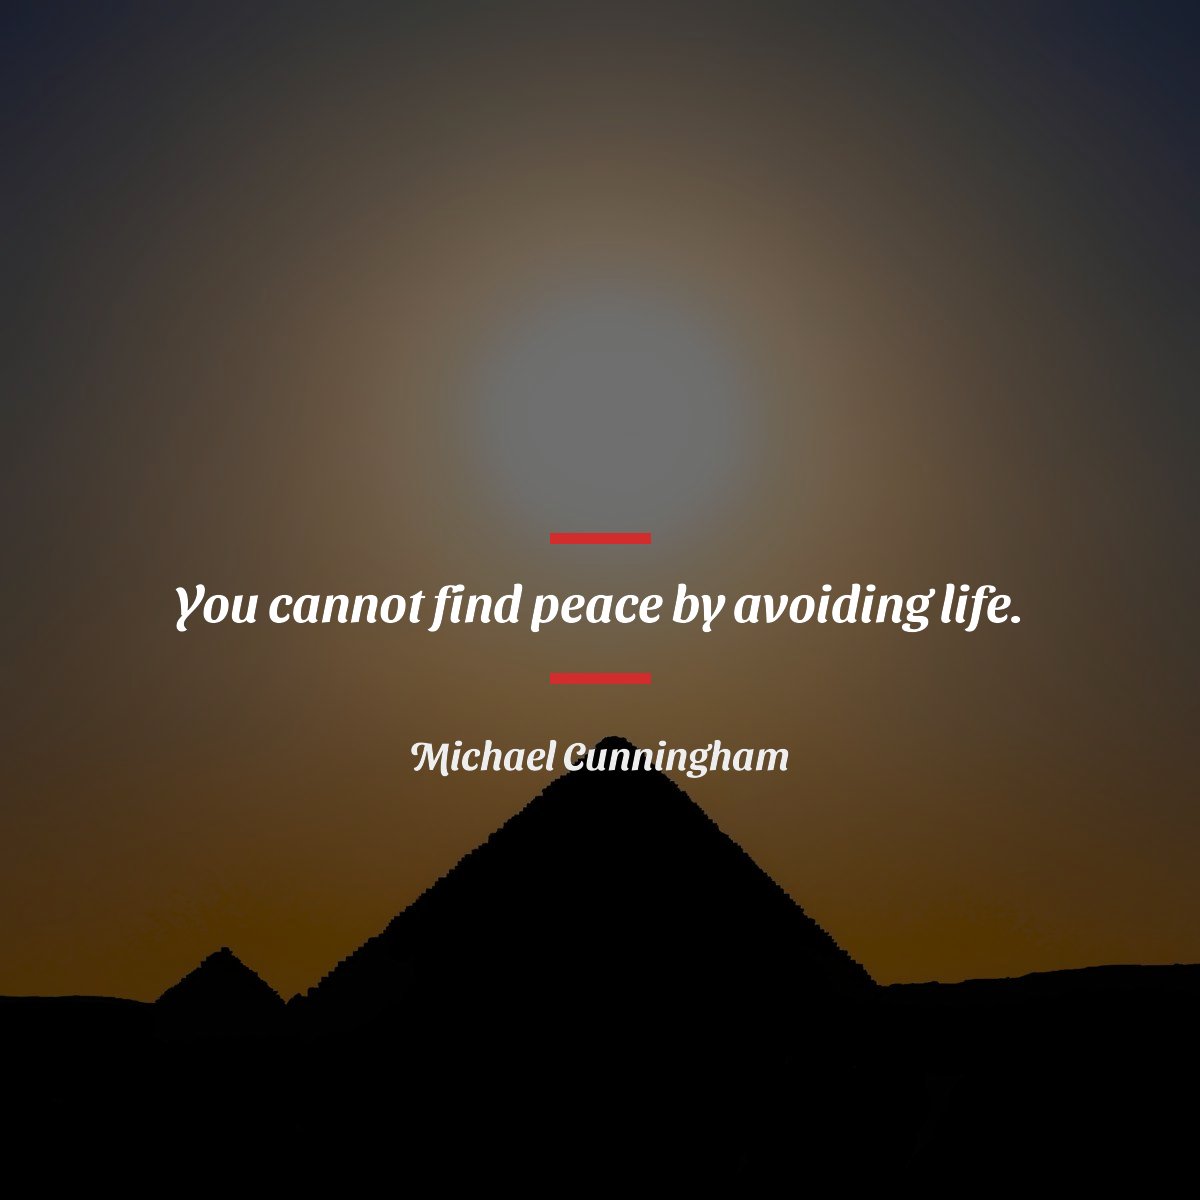 'You cannot find peace by avoiding life.' - Michael Cunningham / The Hours

#quotes #quote #dailyquotes #quoteoftheday #positivequotes #wisdomquotes #michaelcunningham #thehours